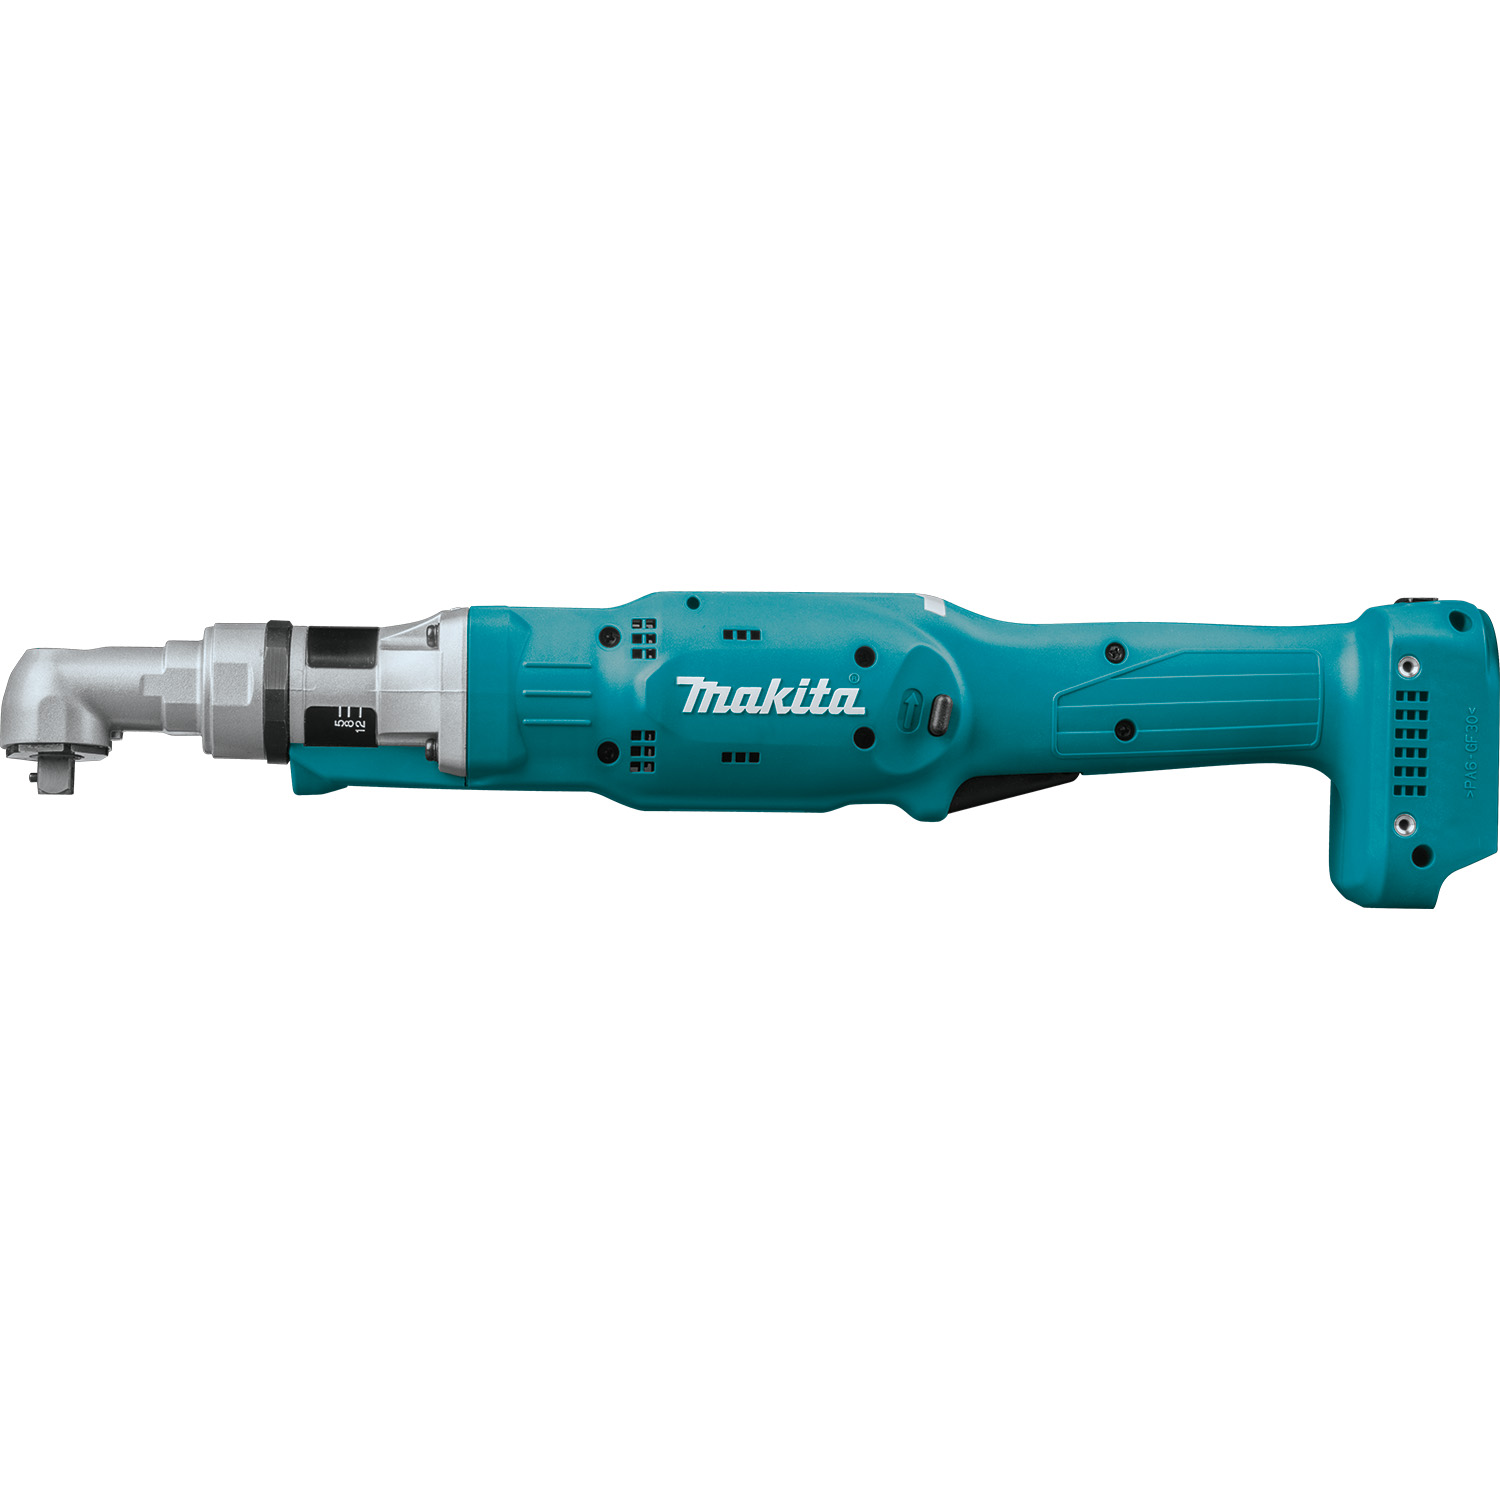 Makita 1/4 in. Square 106 in lb 14.4V Brushless Angle Nutrunner, 700 rpm - DFL125F5Z Flexible Assembly Systems